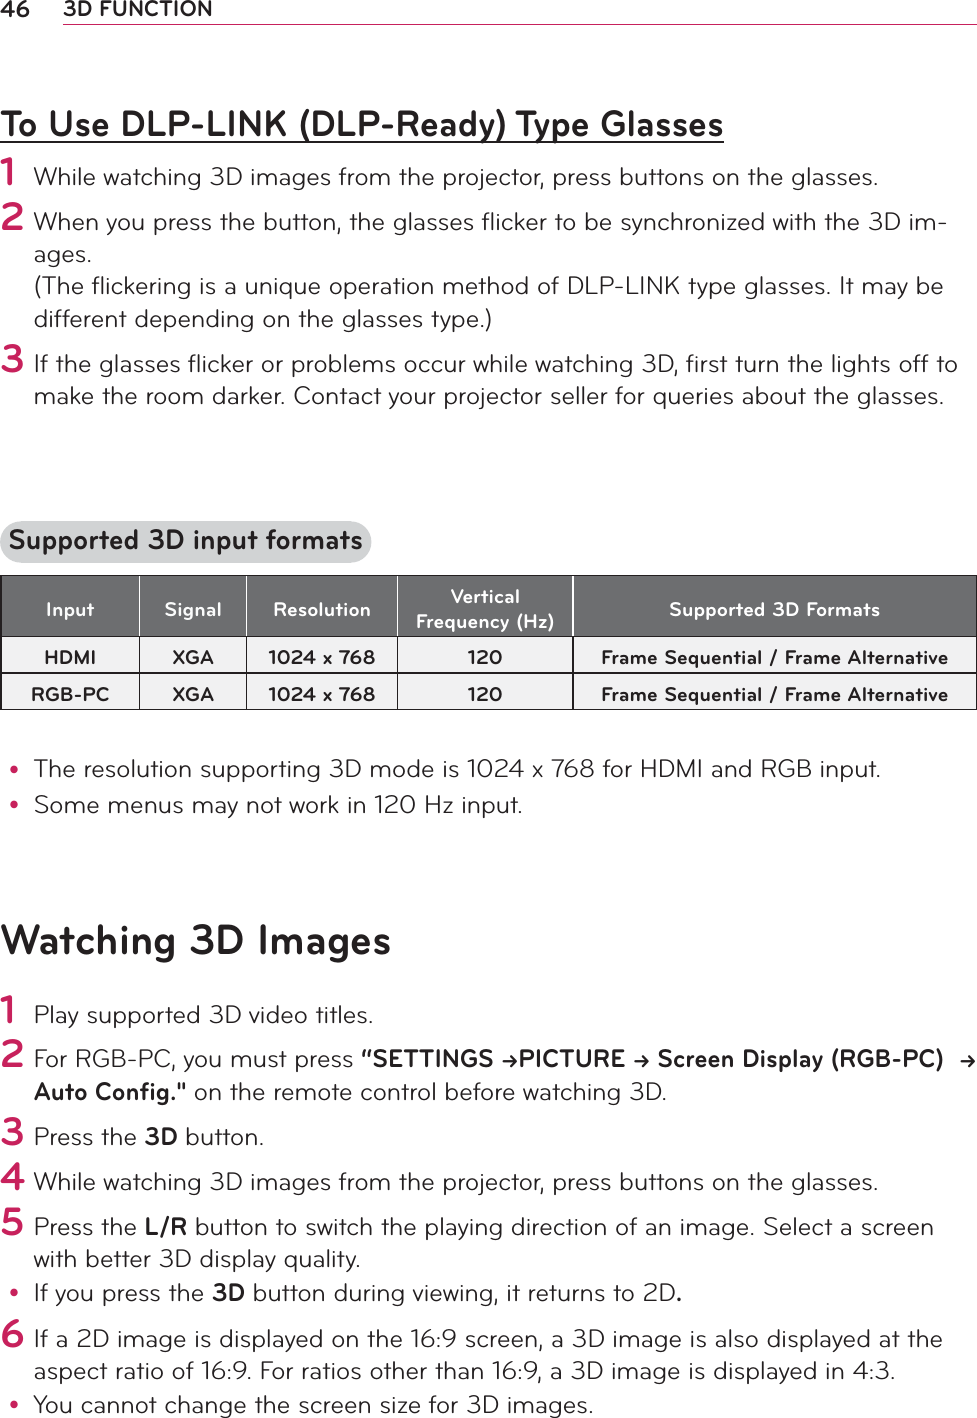 46 3D FUNCTIONTo Use DLP-LINK (DLP-Ready) Type Glasses1 While watching 3D images from the projector, press buttons on the glasses.2  When you press the button, the glasses ﬂicker to be synchronized with the 3D im-ages. (The ﬂickering is a unique operation method of DLP-LINK type glasses. It may be different depending on the glasses type.) 3 If the glasses ﬂicker or problems occur while watching 3D, ﬁrst turn the lights off to make the room darker. Contact your projector seller for queries about the glasses.  Supported 3D input formatsInput Signal Resolution Vertical Frequency (Hz) Supported 3D FormatsHDMI XGA 1024 x 768 120 Frame Sequential / Frame AlternativeRGB-PC XGA 1024 x 768 120 Frame Sequential / Frame Alternativey The resolution supporting 3D mode is 1024 x 768 for HDMI and RGB input.y Some menus may not work in 120 Hz input.Watching 3D Images1 Play supported 3D video titles. 2        For RGB-PC, you must press “SETTINGS PICTURE  Screen Display (RGB-PC)   Auto Config.&quot; on the remote control before watching 3D.    3 Press the 3D button.   4 While watching 3D images from the projector, press buttons on the glasses.5 Press the L/R button to switch the playing direction of an image. Select a screen with better 3D display quality.y If you press the 3D button during viewing, it returns to 2D.   6 If a 2D image is displayed on the 16:9 screen, a 3D image is also displayed at the aspect ratio of 16:9. For ratios other than 16:9, a 3D image is displayed in 4:3.y You cannot change the screen size for 3D images.